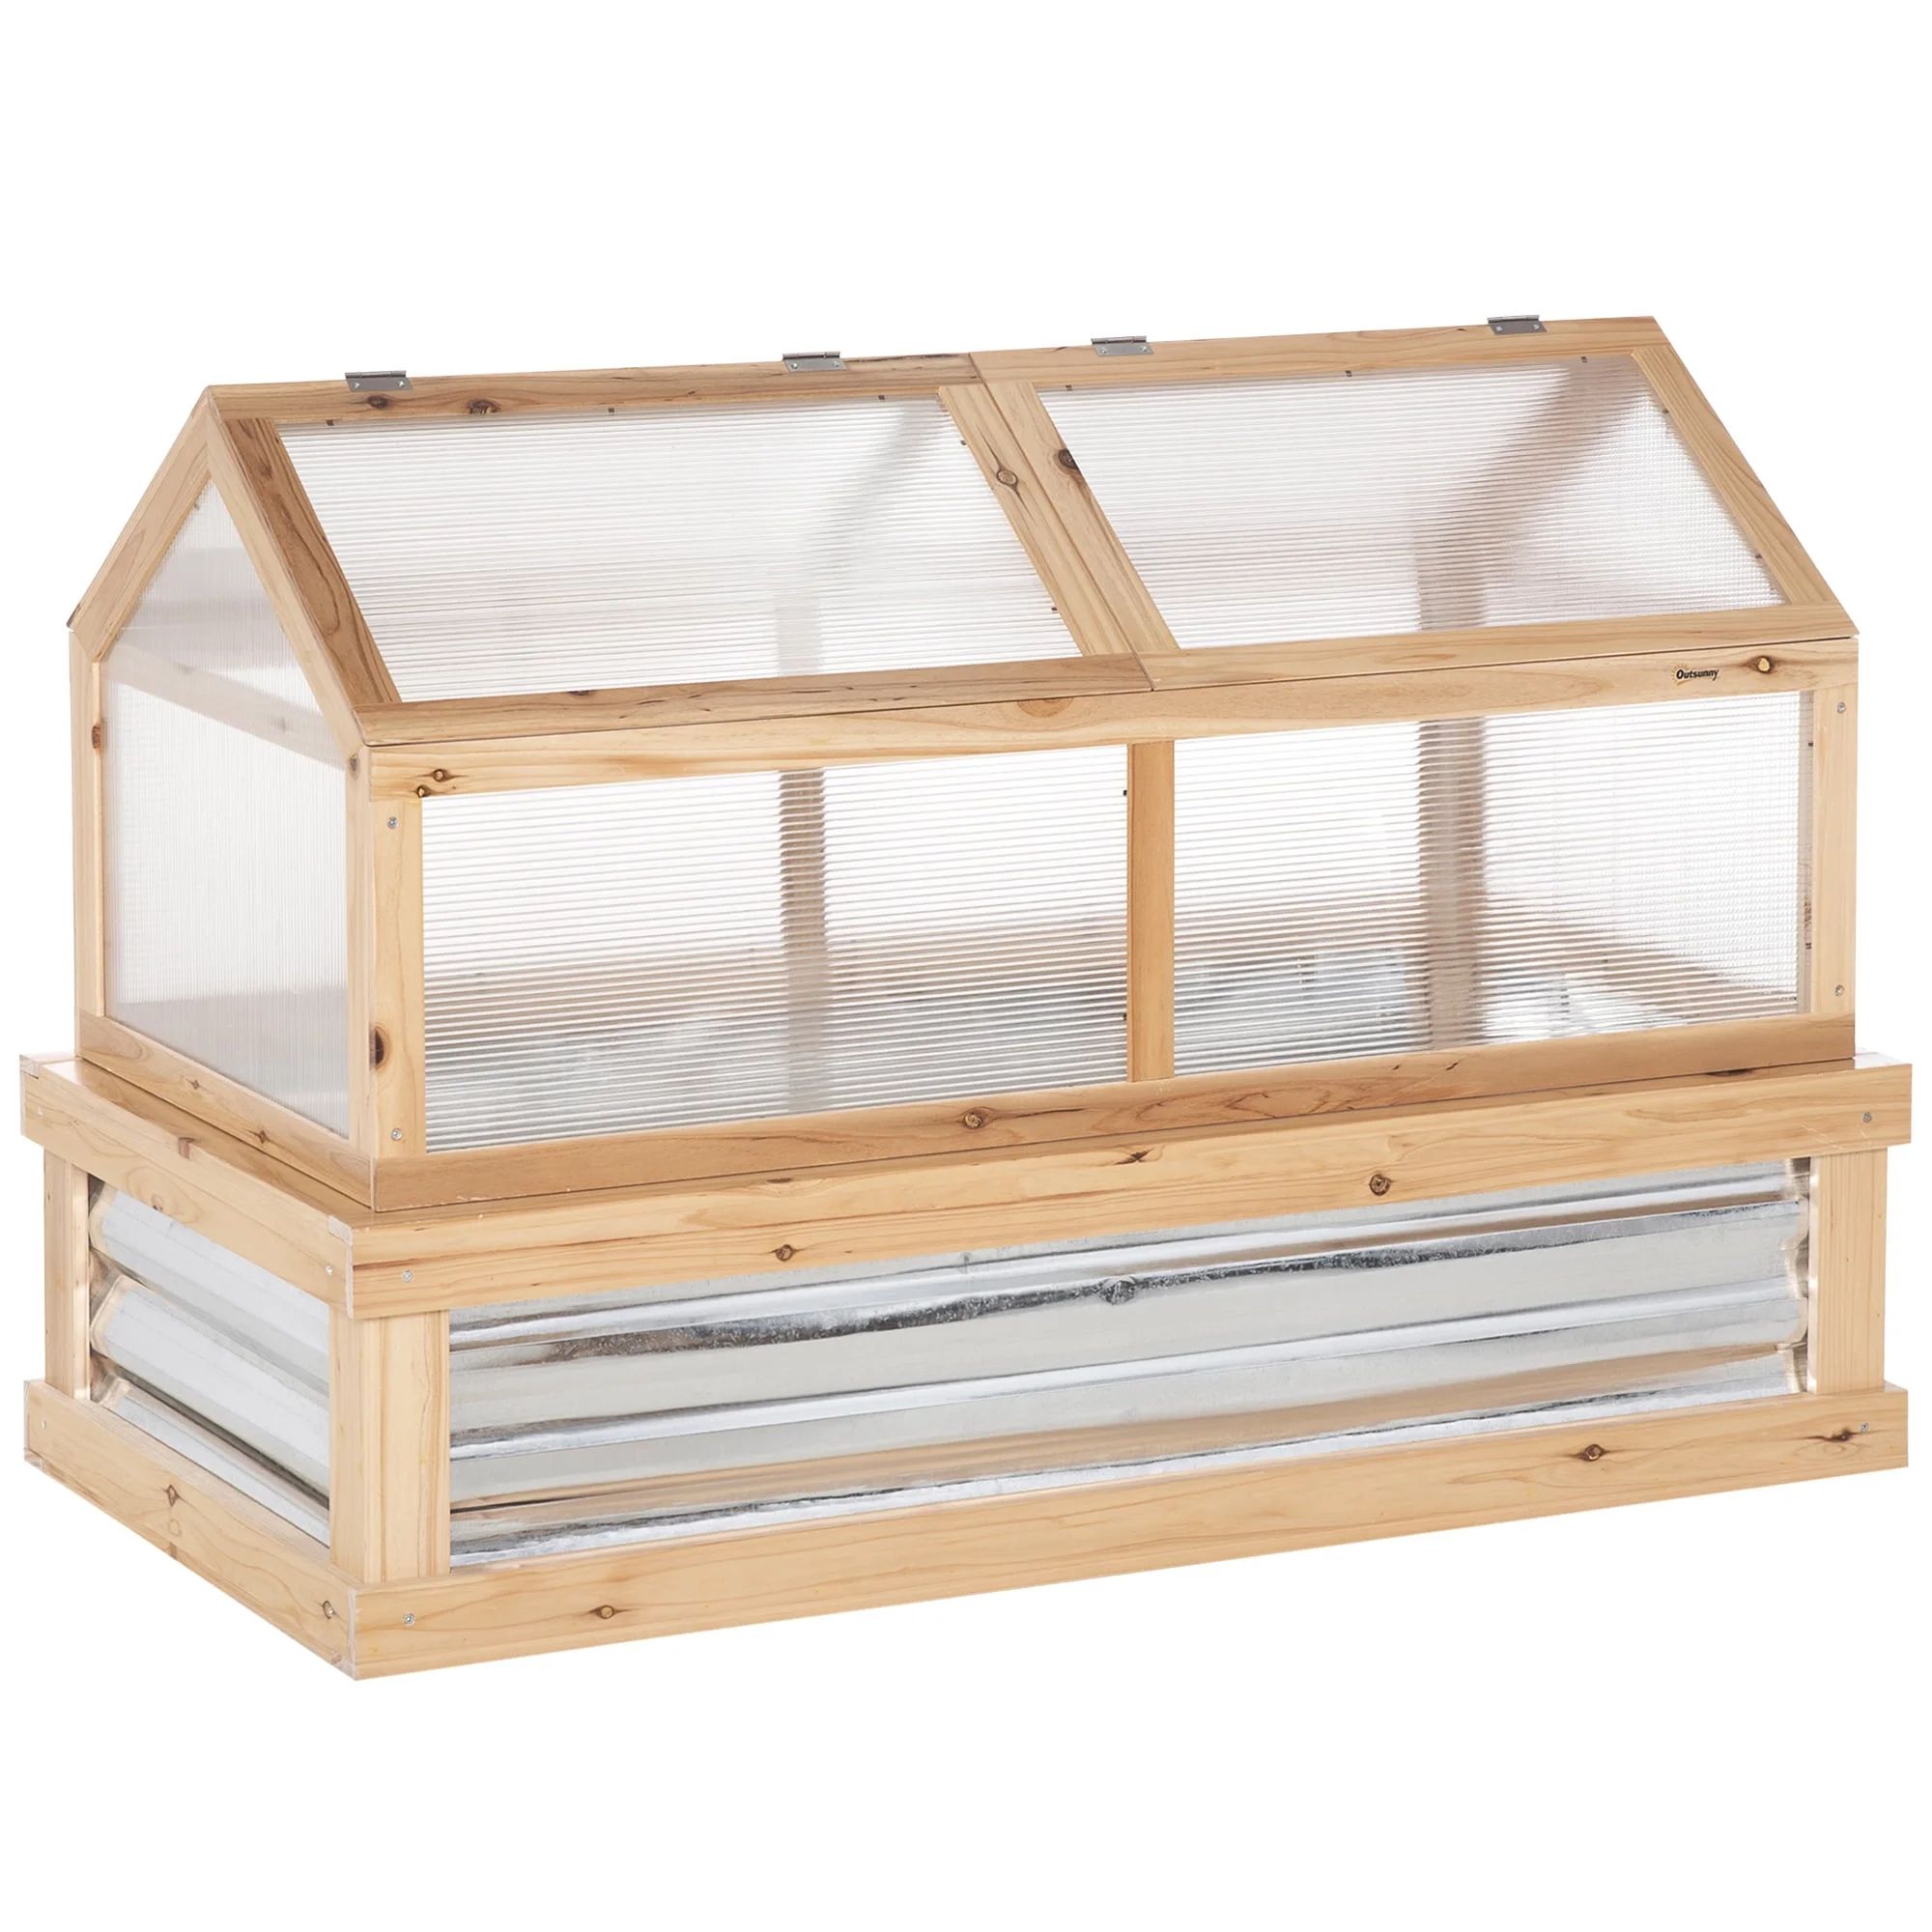 Outsunny Raised Garden Bed with Polycarbonate Greenhouse, 48" x 24" x 32", Natural | Walmart (US)